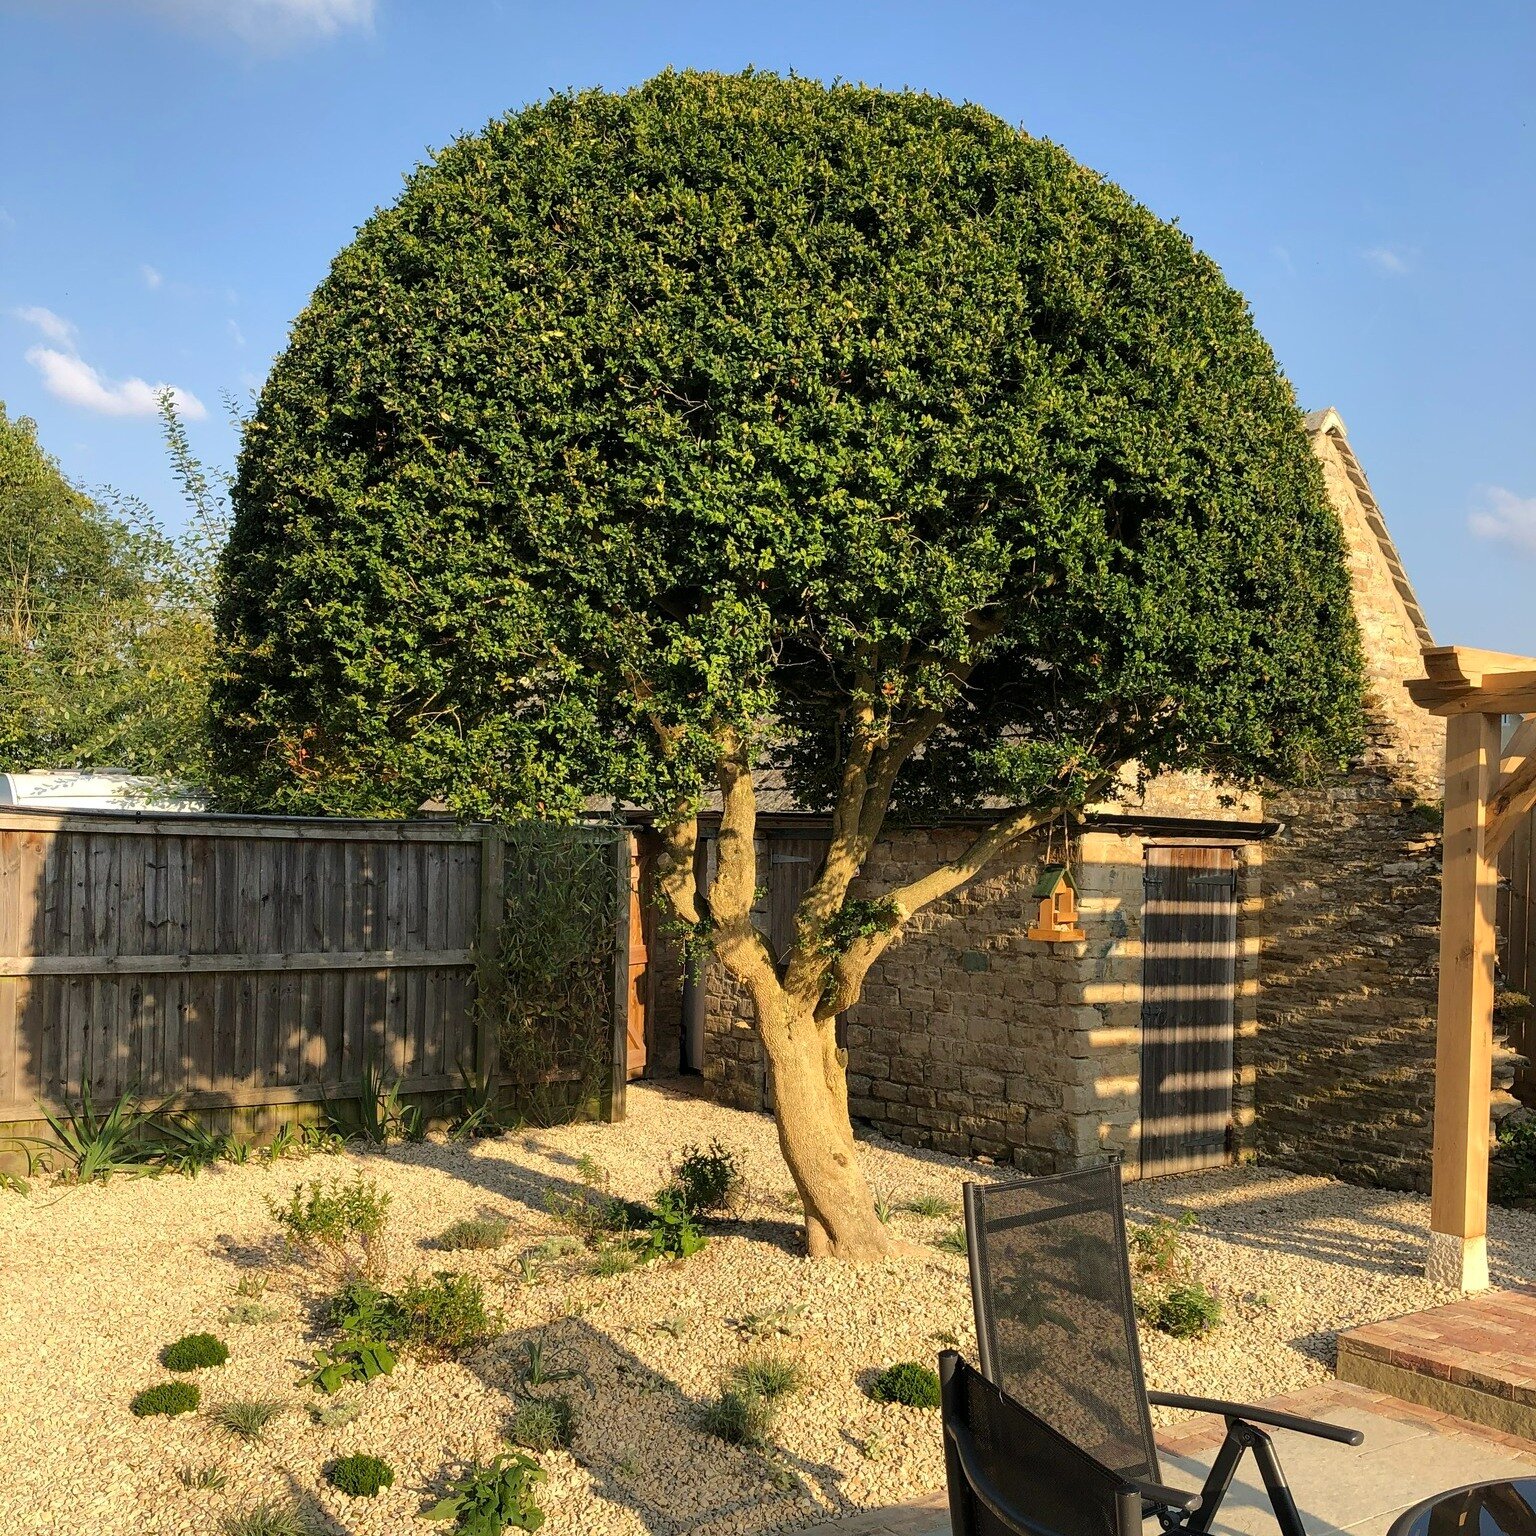 Quite often when planning a new garden, it isn't necessary or desirable to remove everything to create a blank canvas. In our &quot;Contemporary Cotswolds&quot; garden, we retained an existing large Box tree, but lifted the canopy and pruned it to re